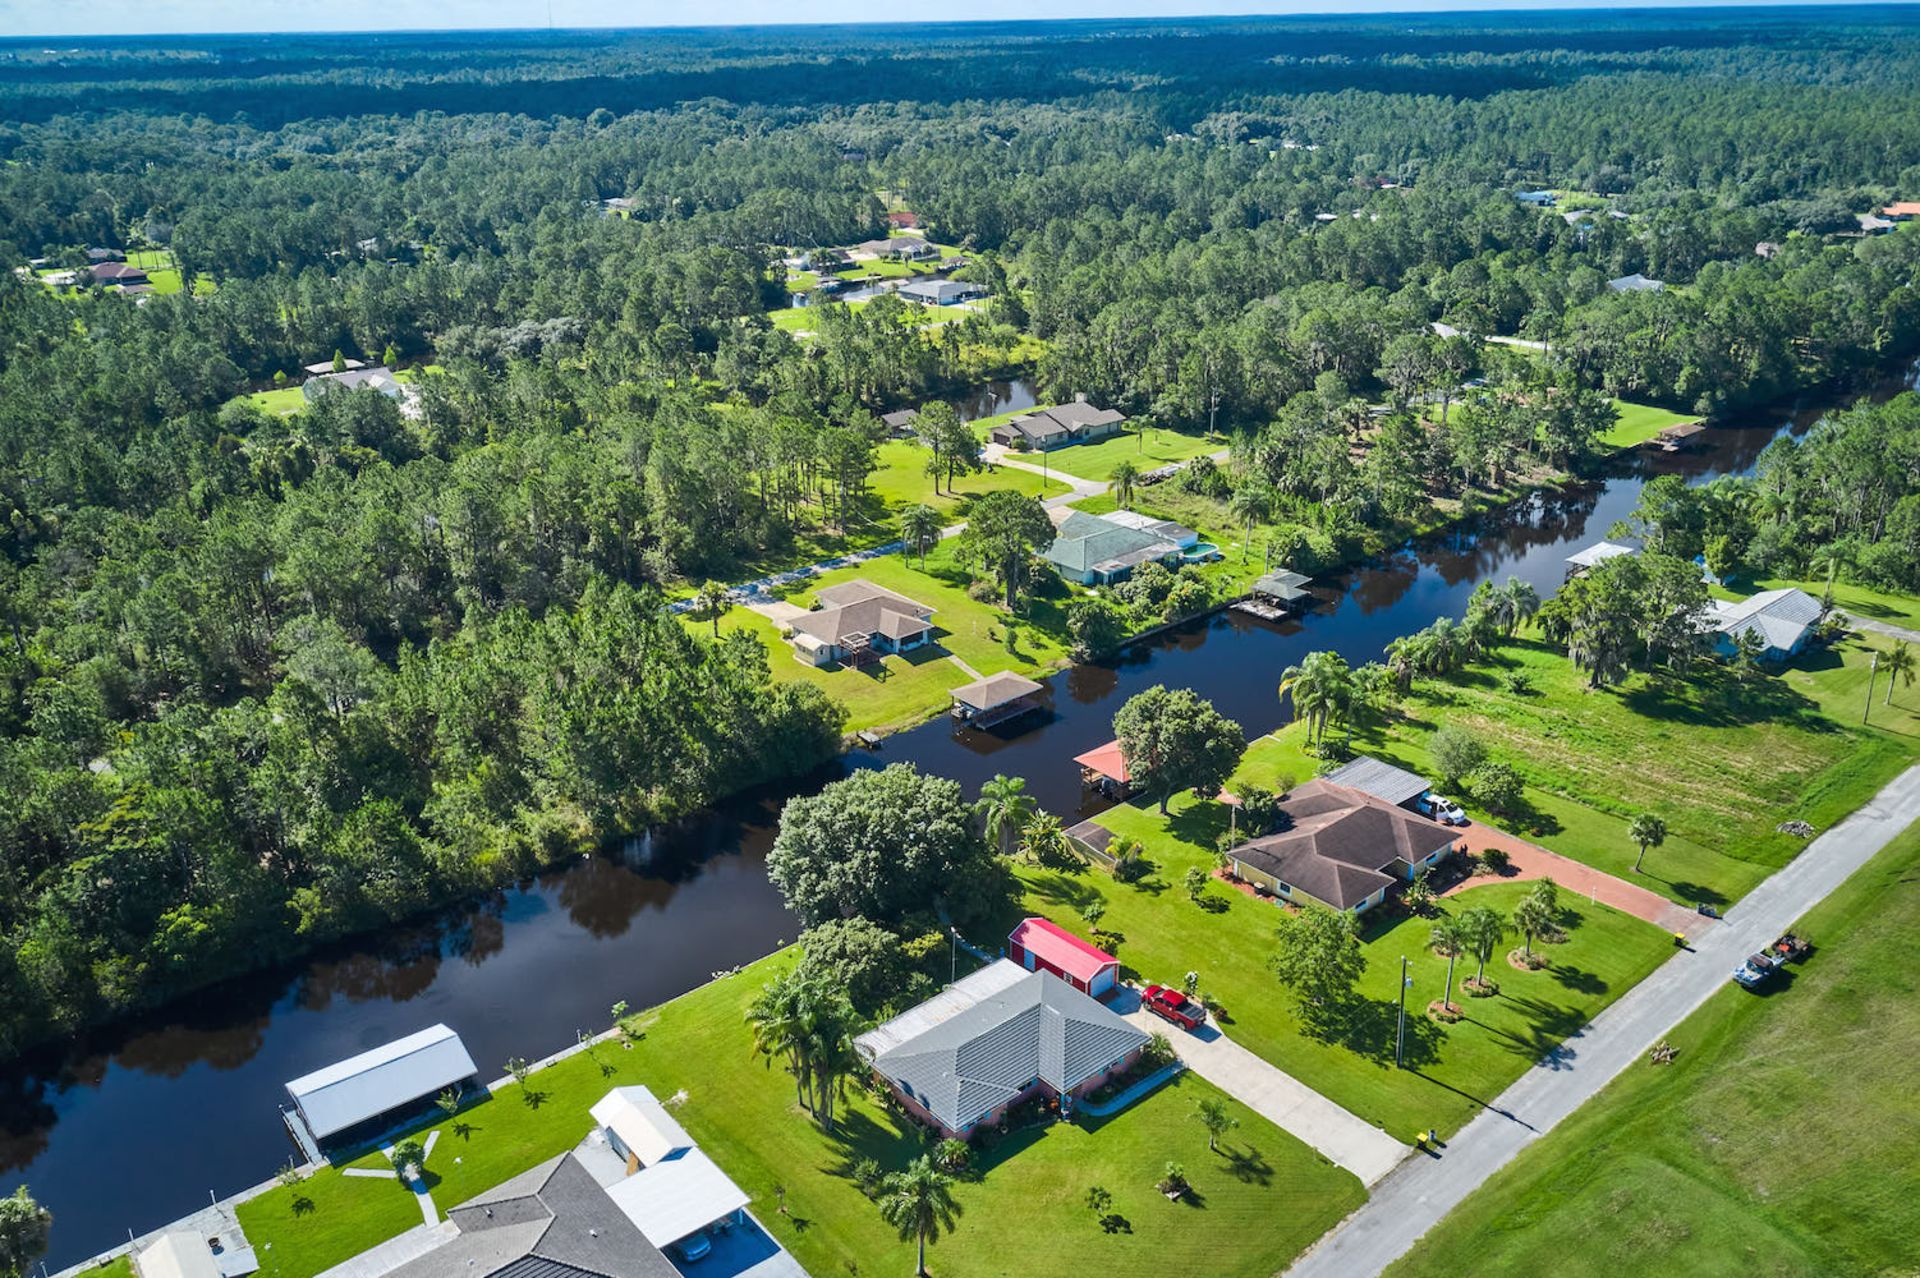 Build Your Central Florida Getaway on this Half-Acre Lot in Indian Lake Estates!